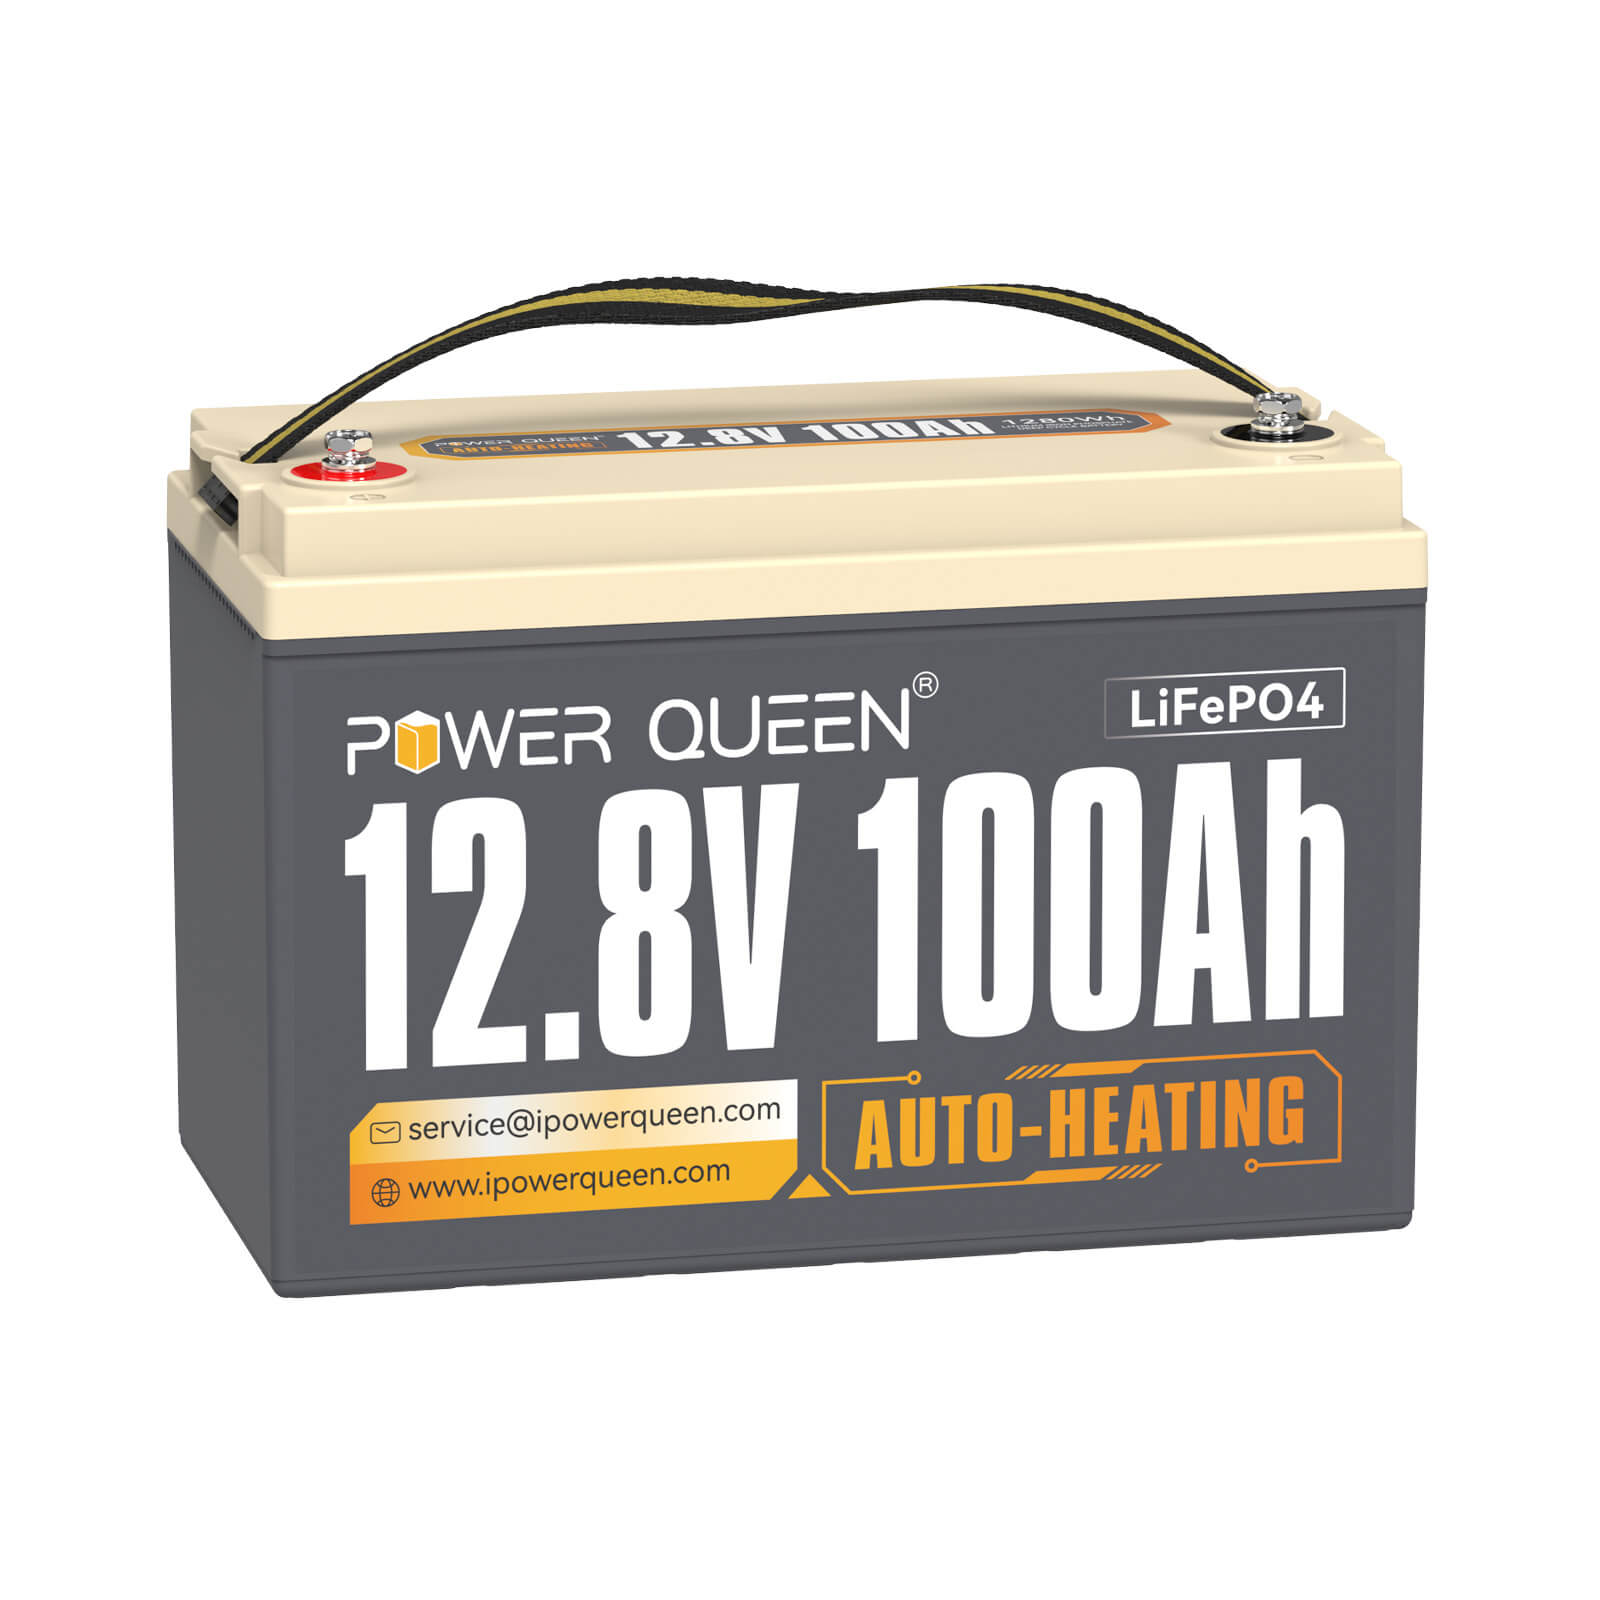 【Like New】Power Queen 12.8V 100Ah Self-Heating LiFePO4 Battery, Built-in 100A BMS